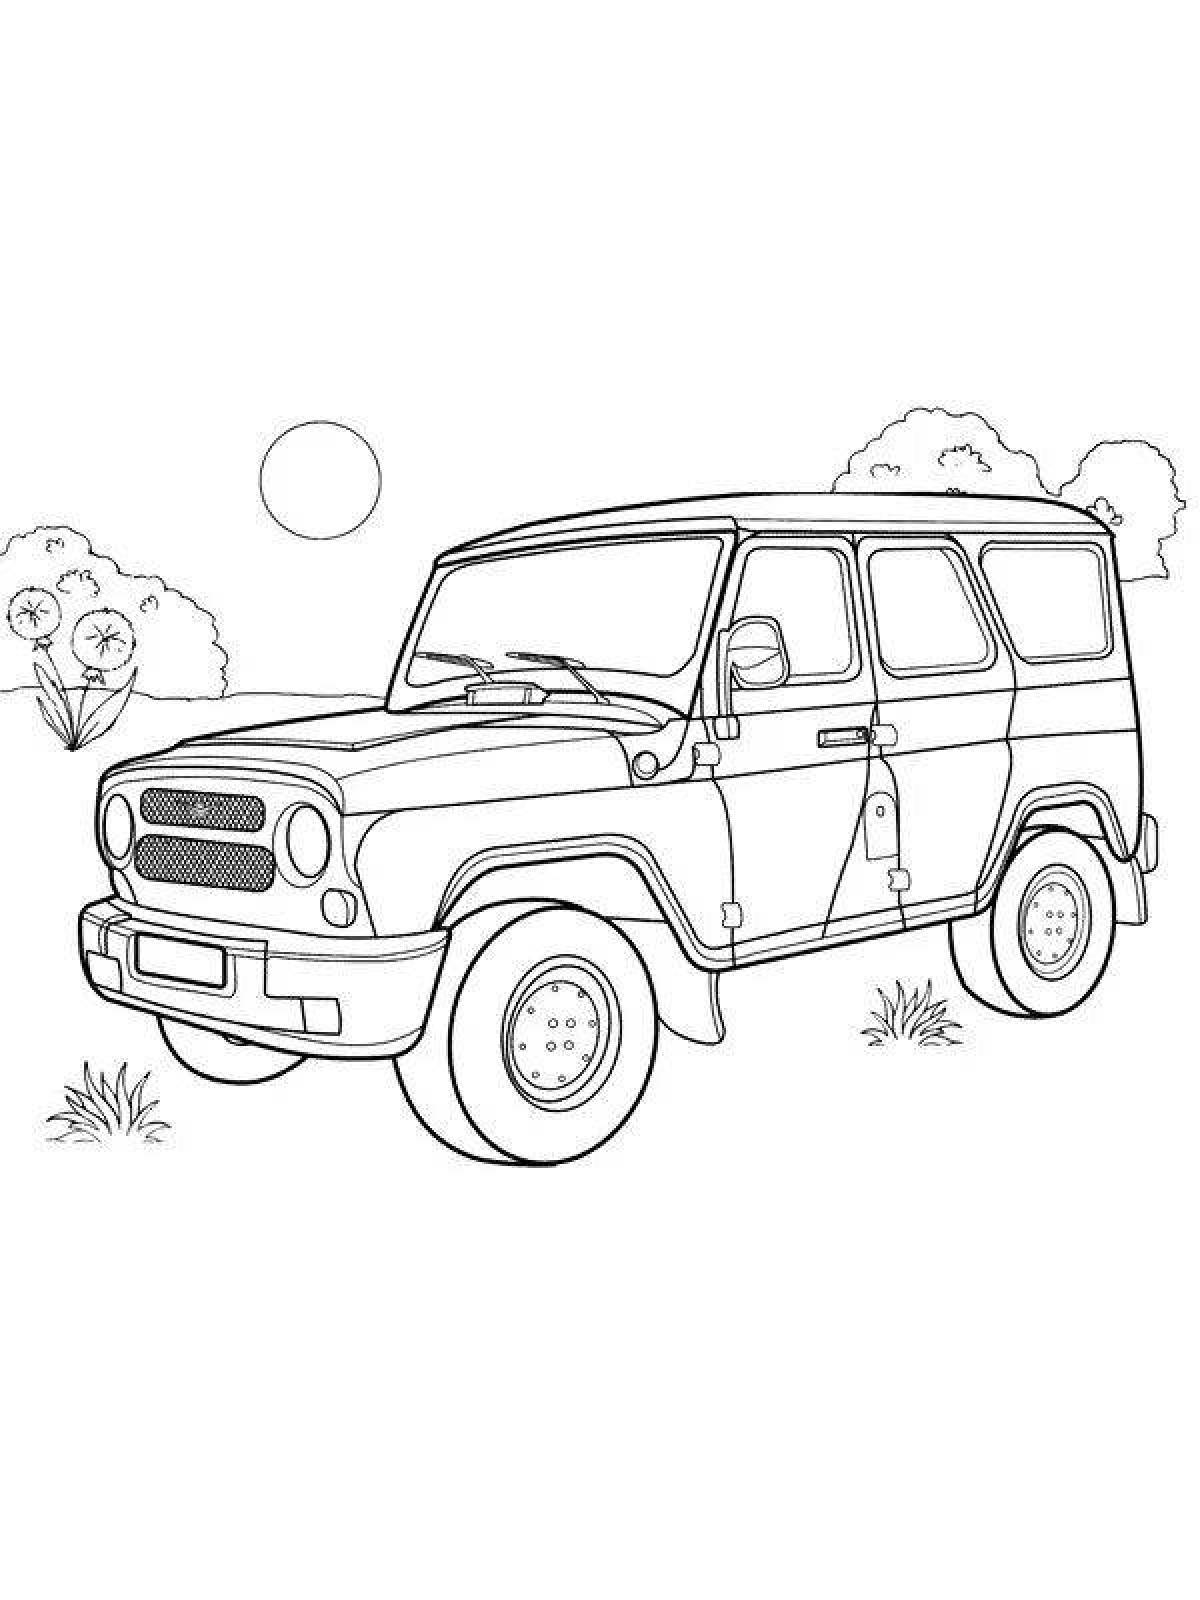 Playful UAZ hunter coloring page